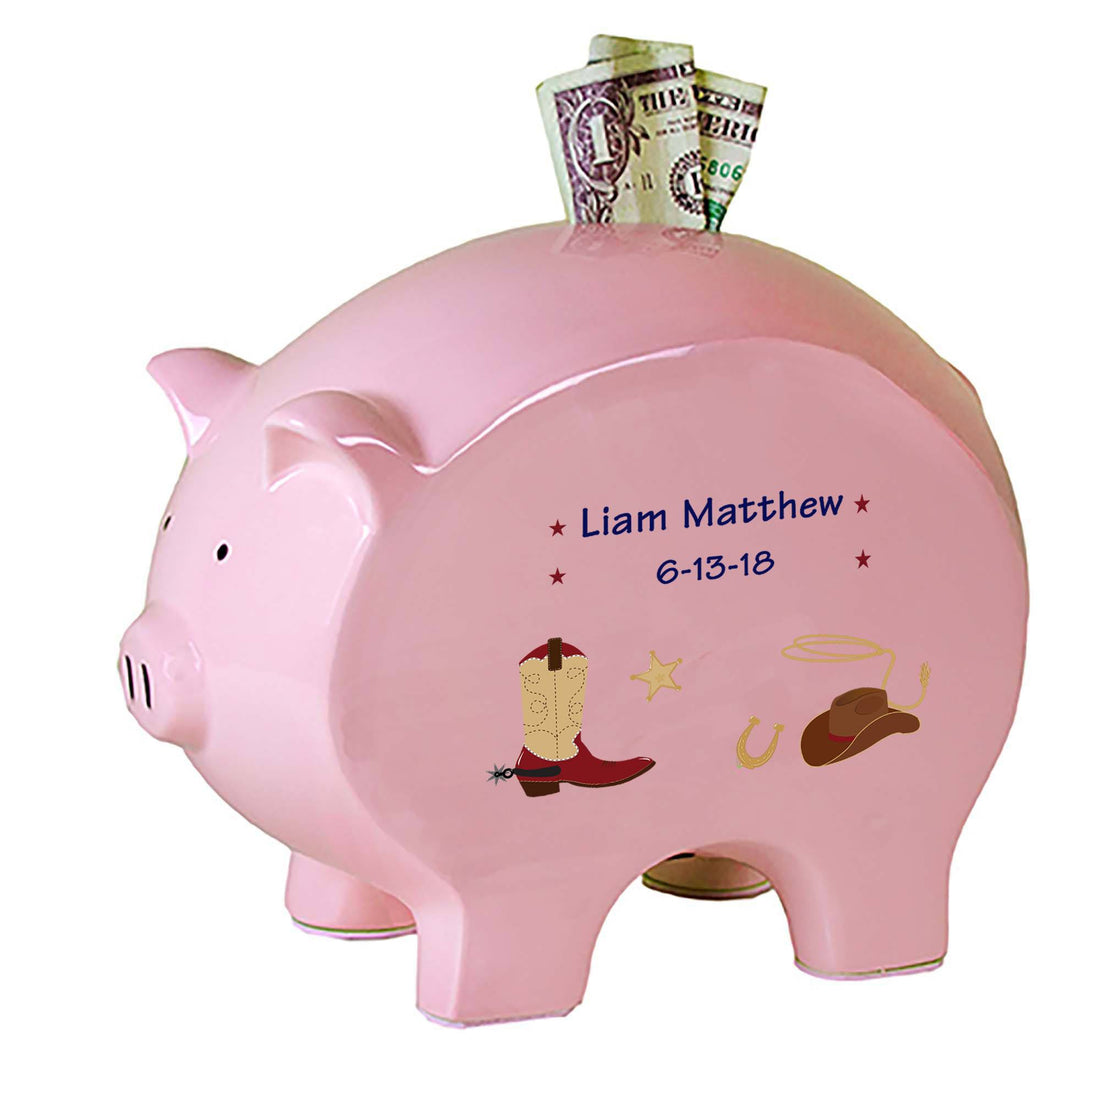 Personalized Pink Piggy Bank with Wild West design